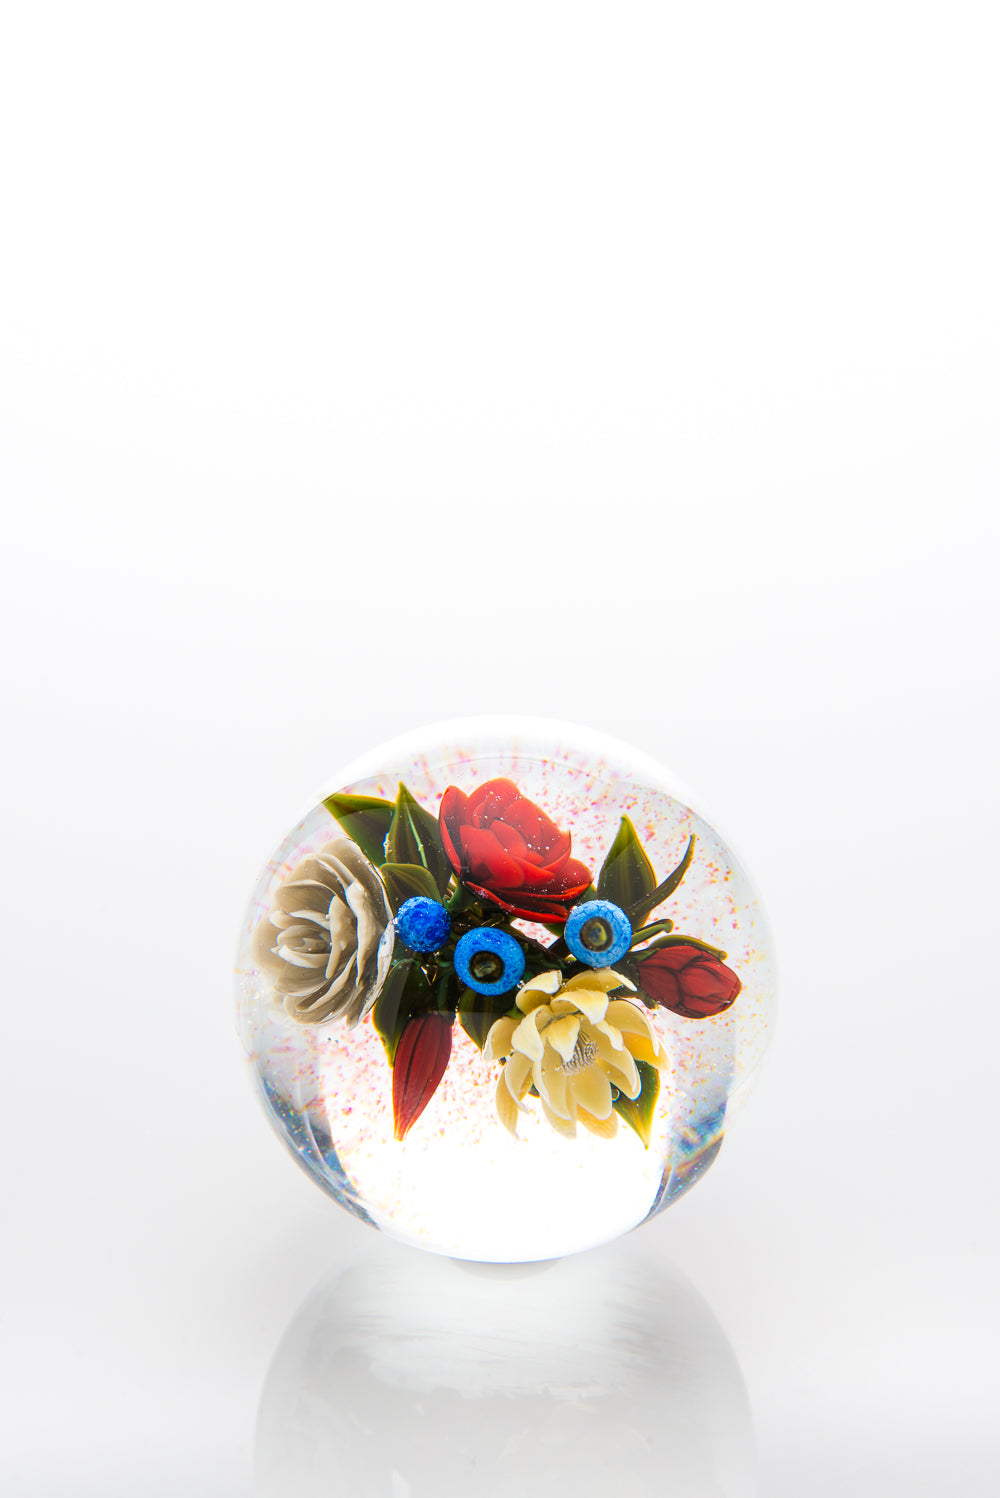 Two Inch Marble with Floral Arrangement by Akihiro Okama